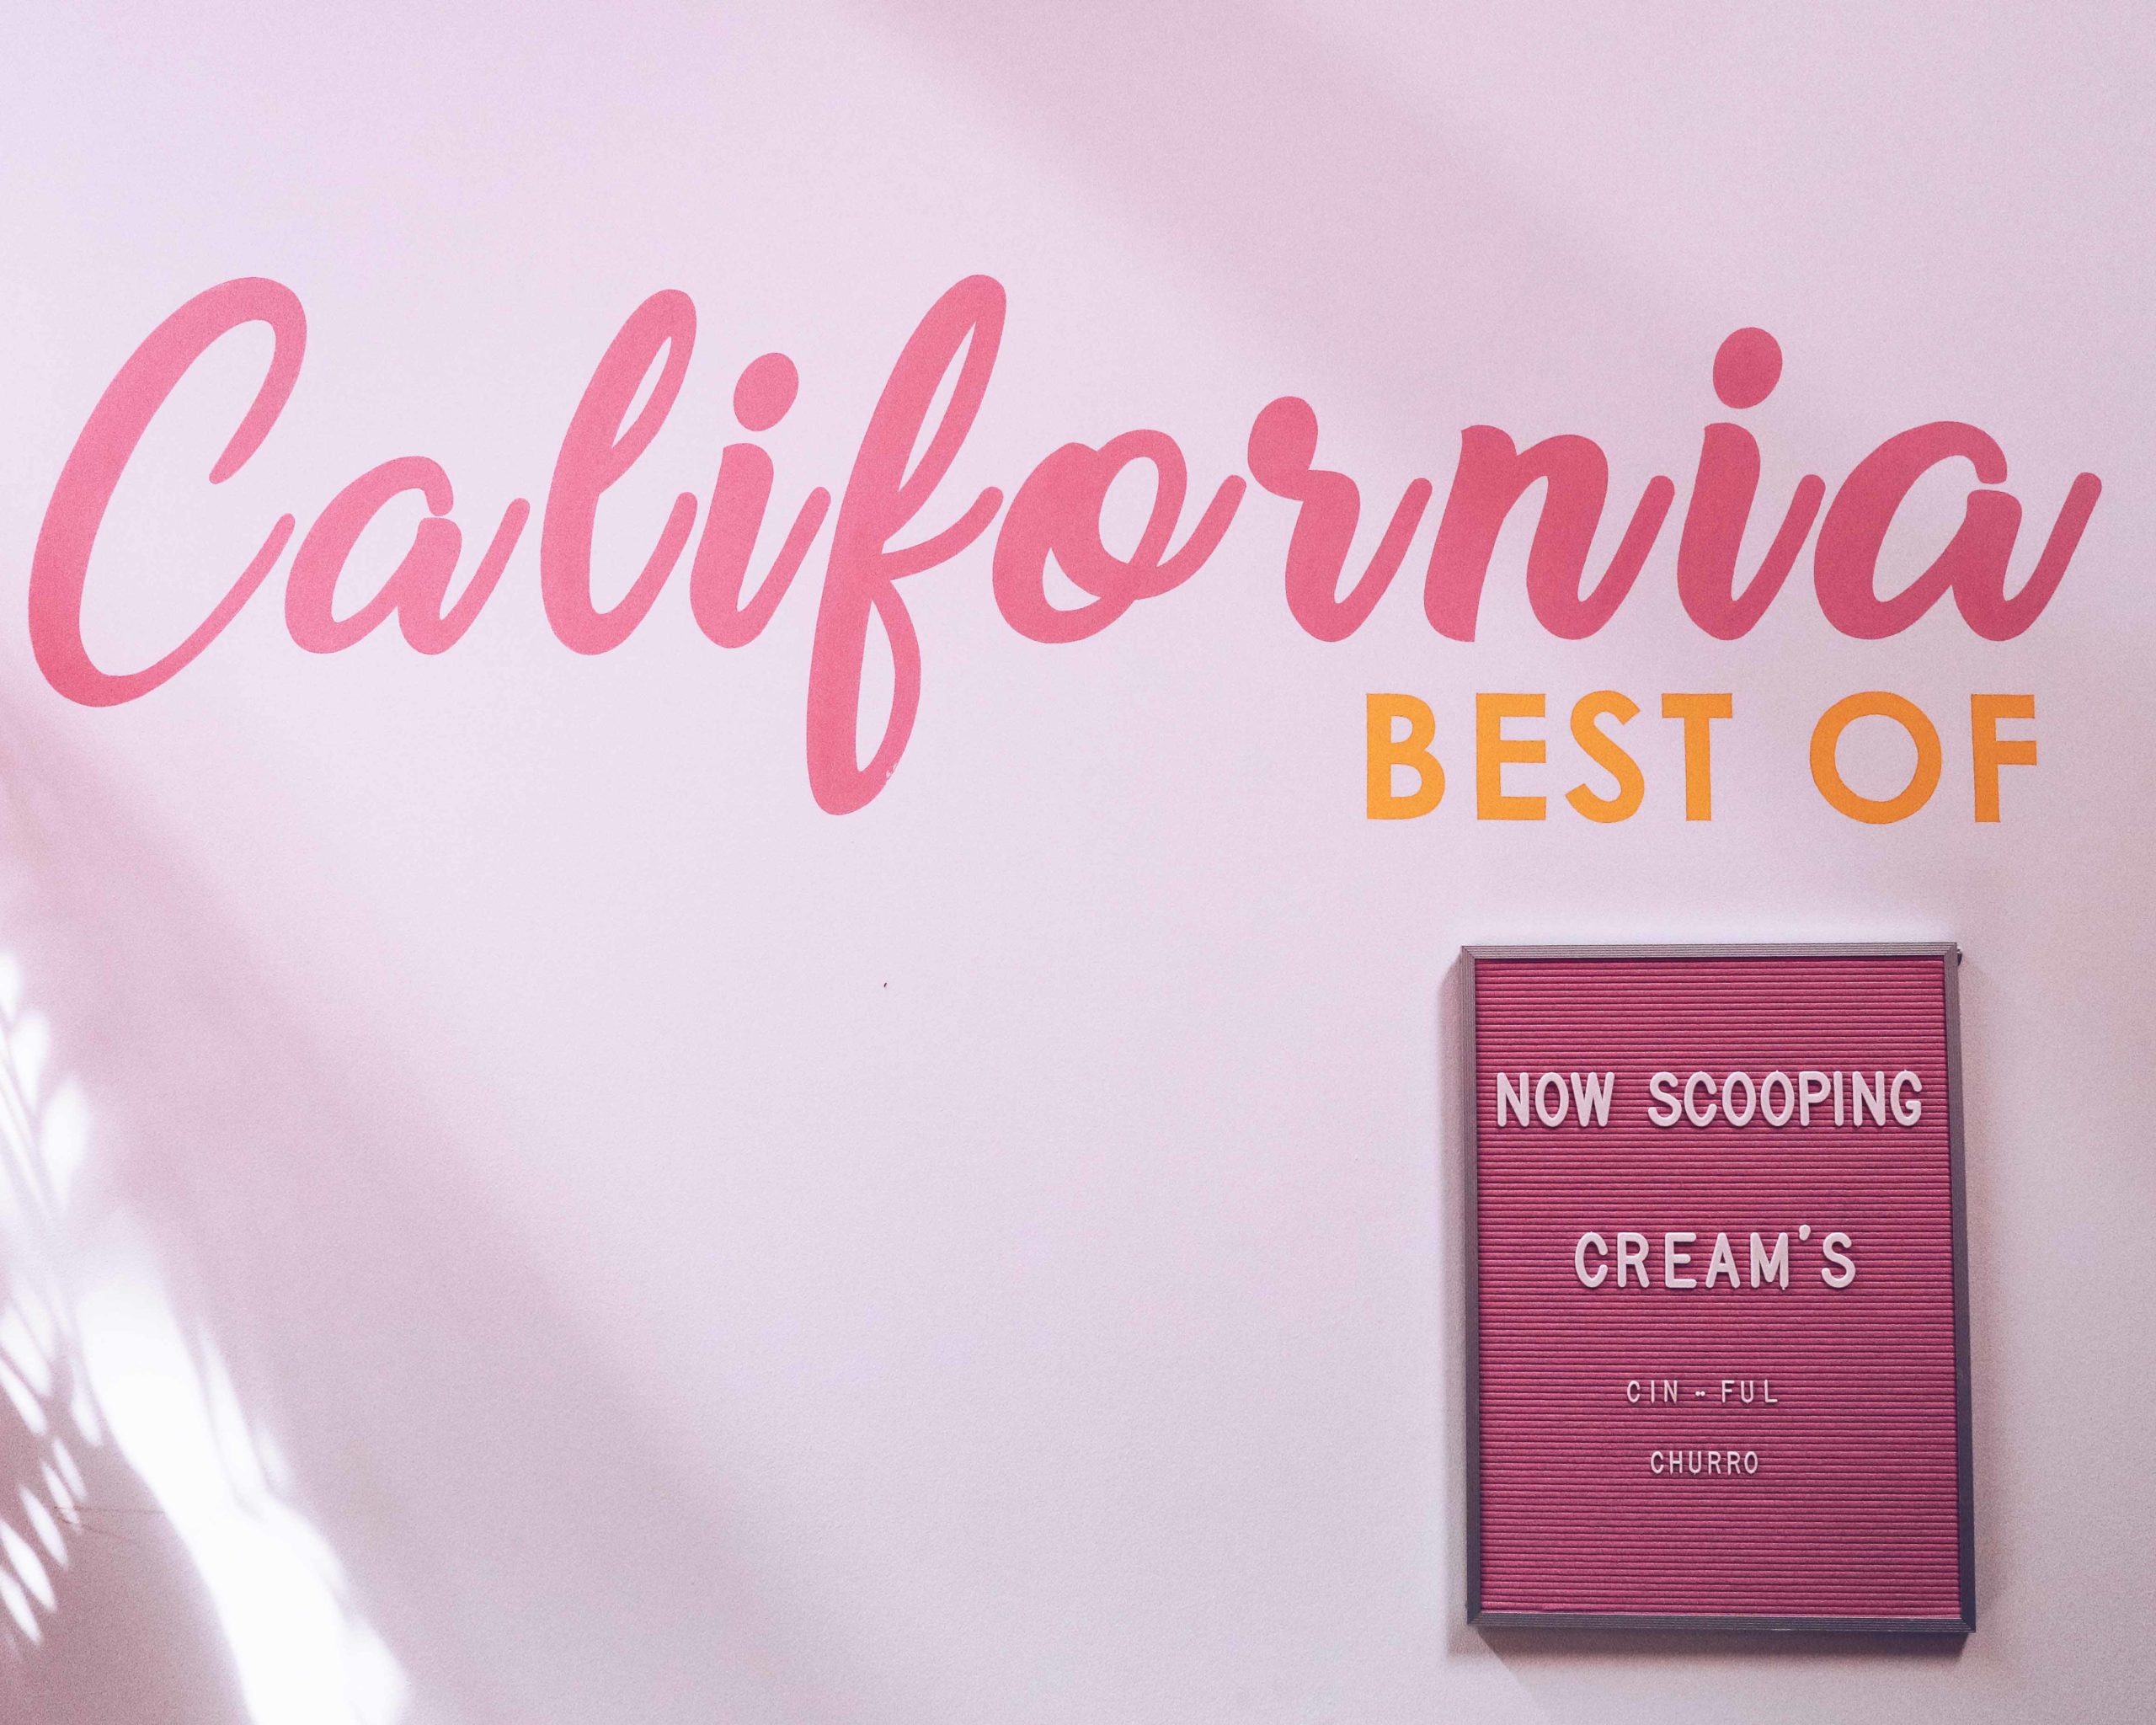 5 things to know about the Museum Of Ice Cream San Francisco and Museum of Ice Cream Los Angeles before buying your tickets. Read more on Modersvp.com